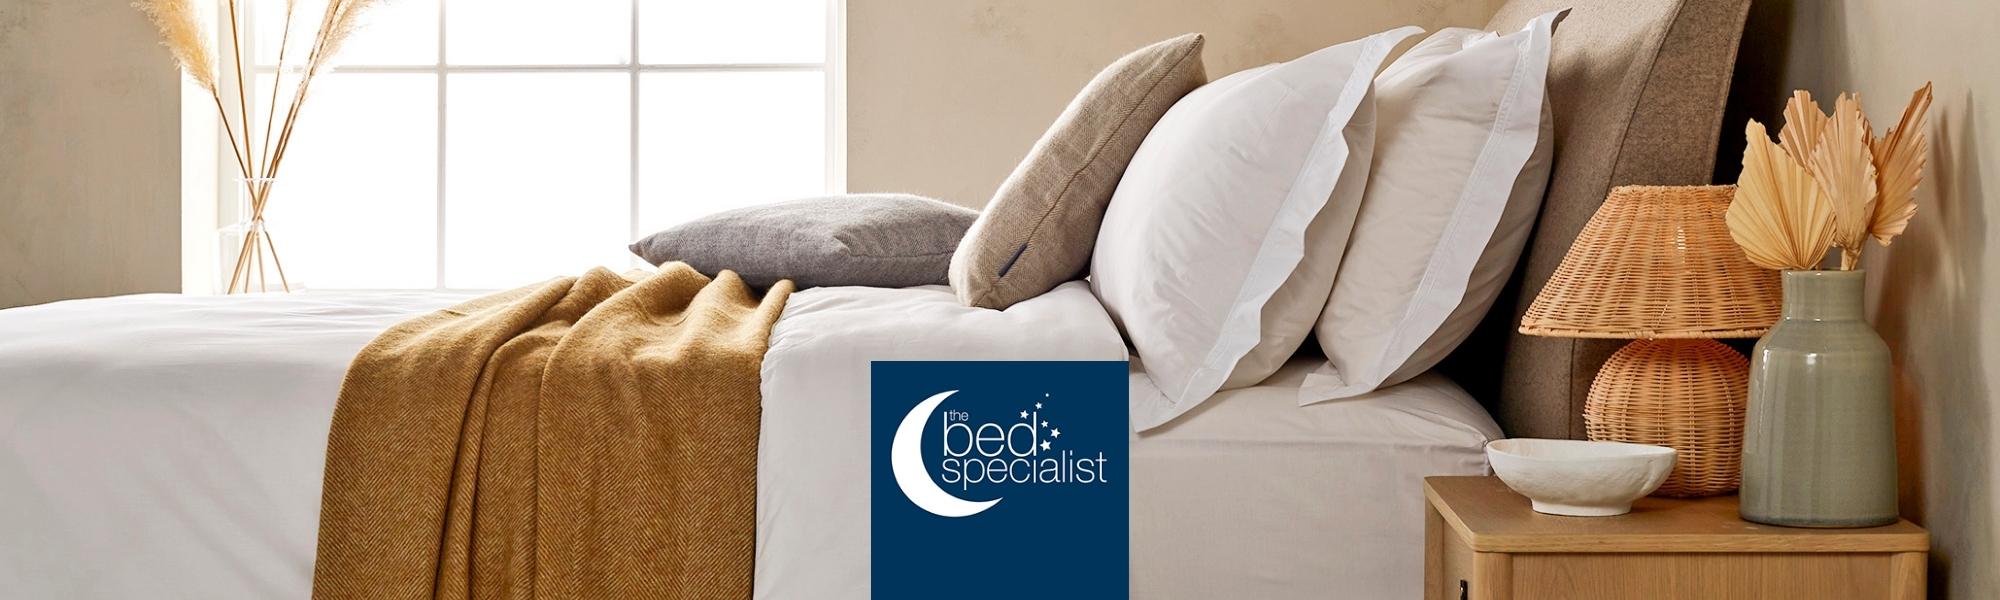 Stockists - The Bed Specialist